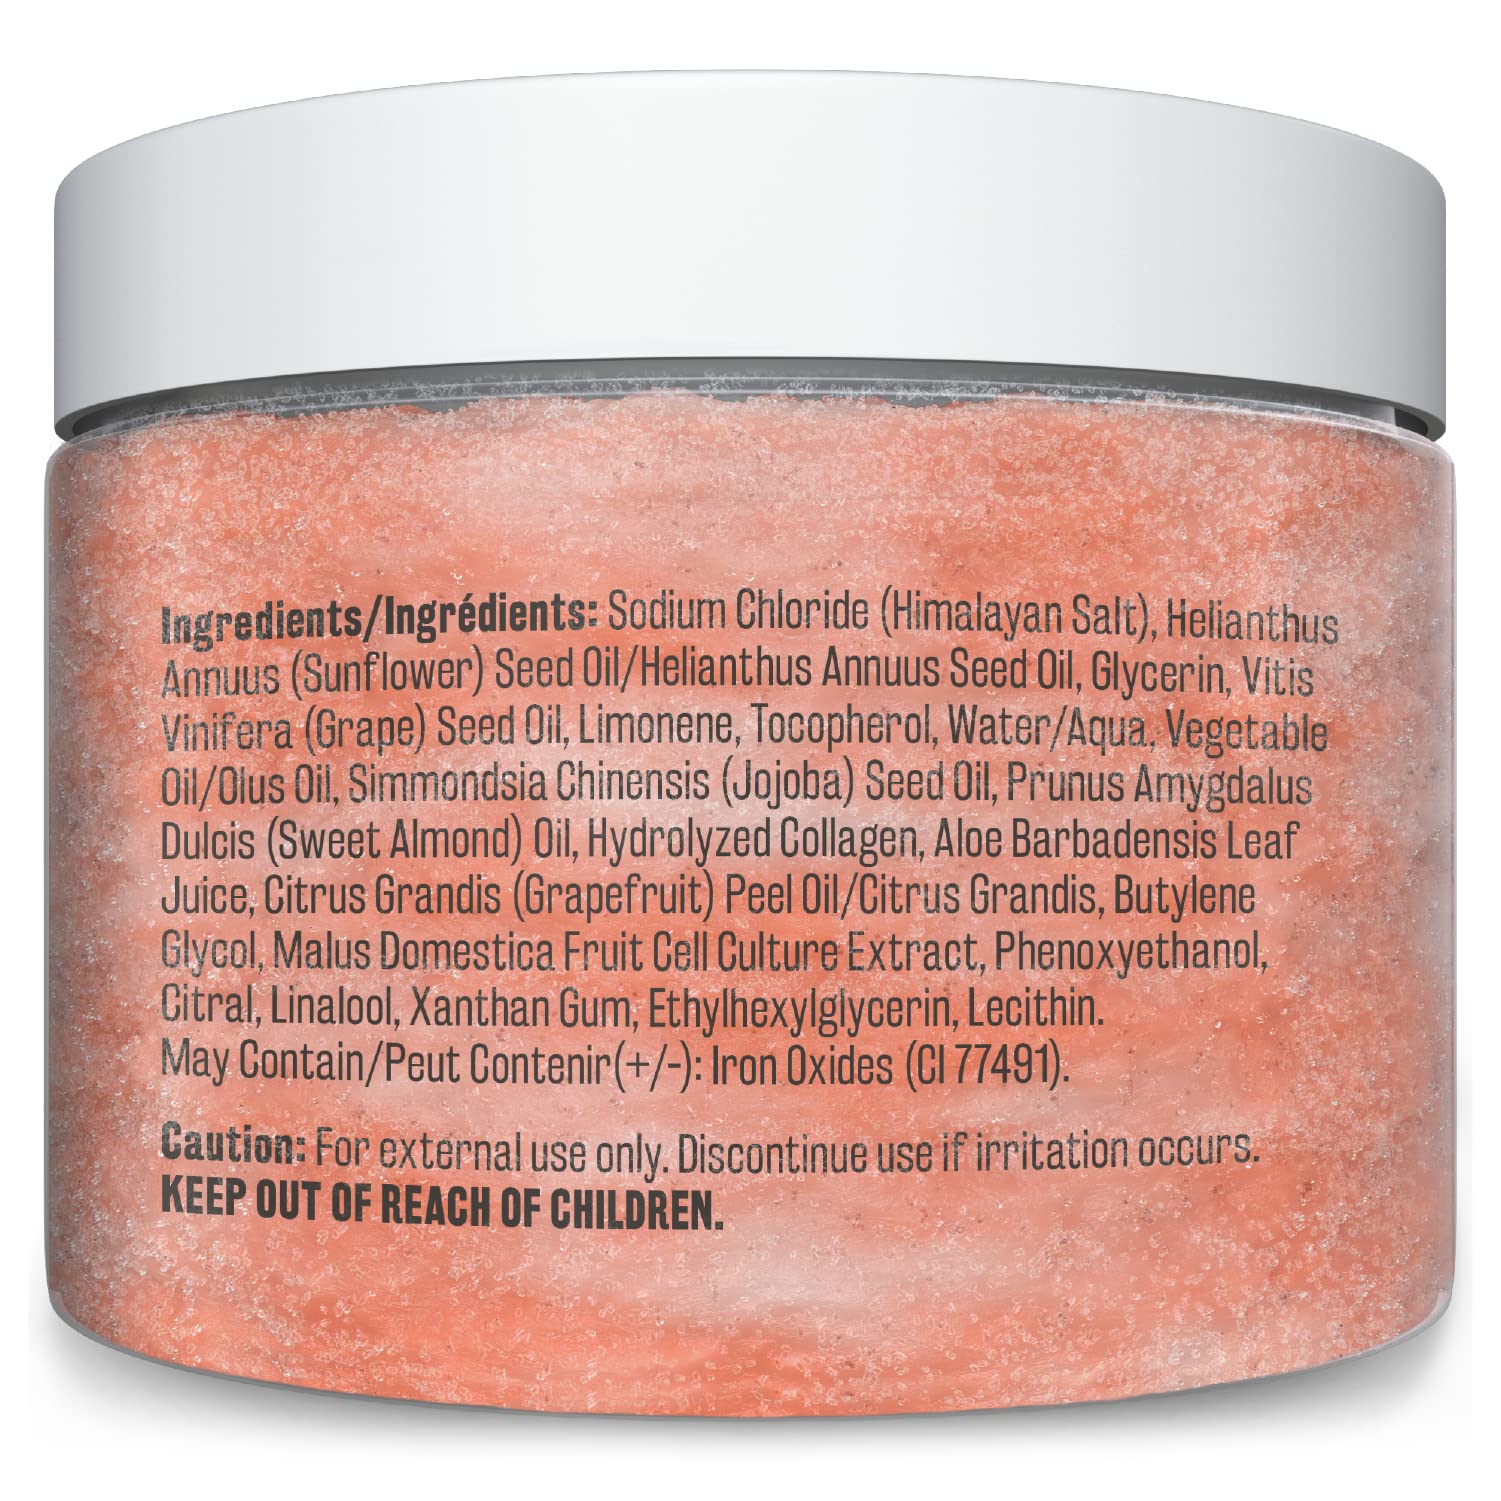 Himalayan Salt Scrub Exfoliating Foot, Scalp & Body Scrub Infused with Collagen and Stem Cell Natural Exfoliating Salt Scrub for Toning Skin Cellulite Deep Cleansing SkinCare Scrub | Exfoliate and Moisturize by M3 Naturals